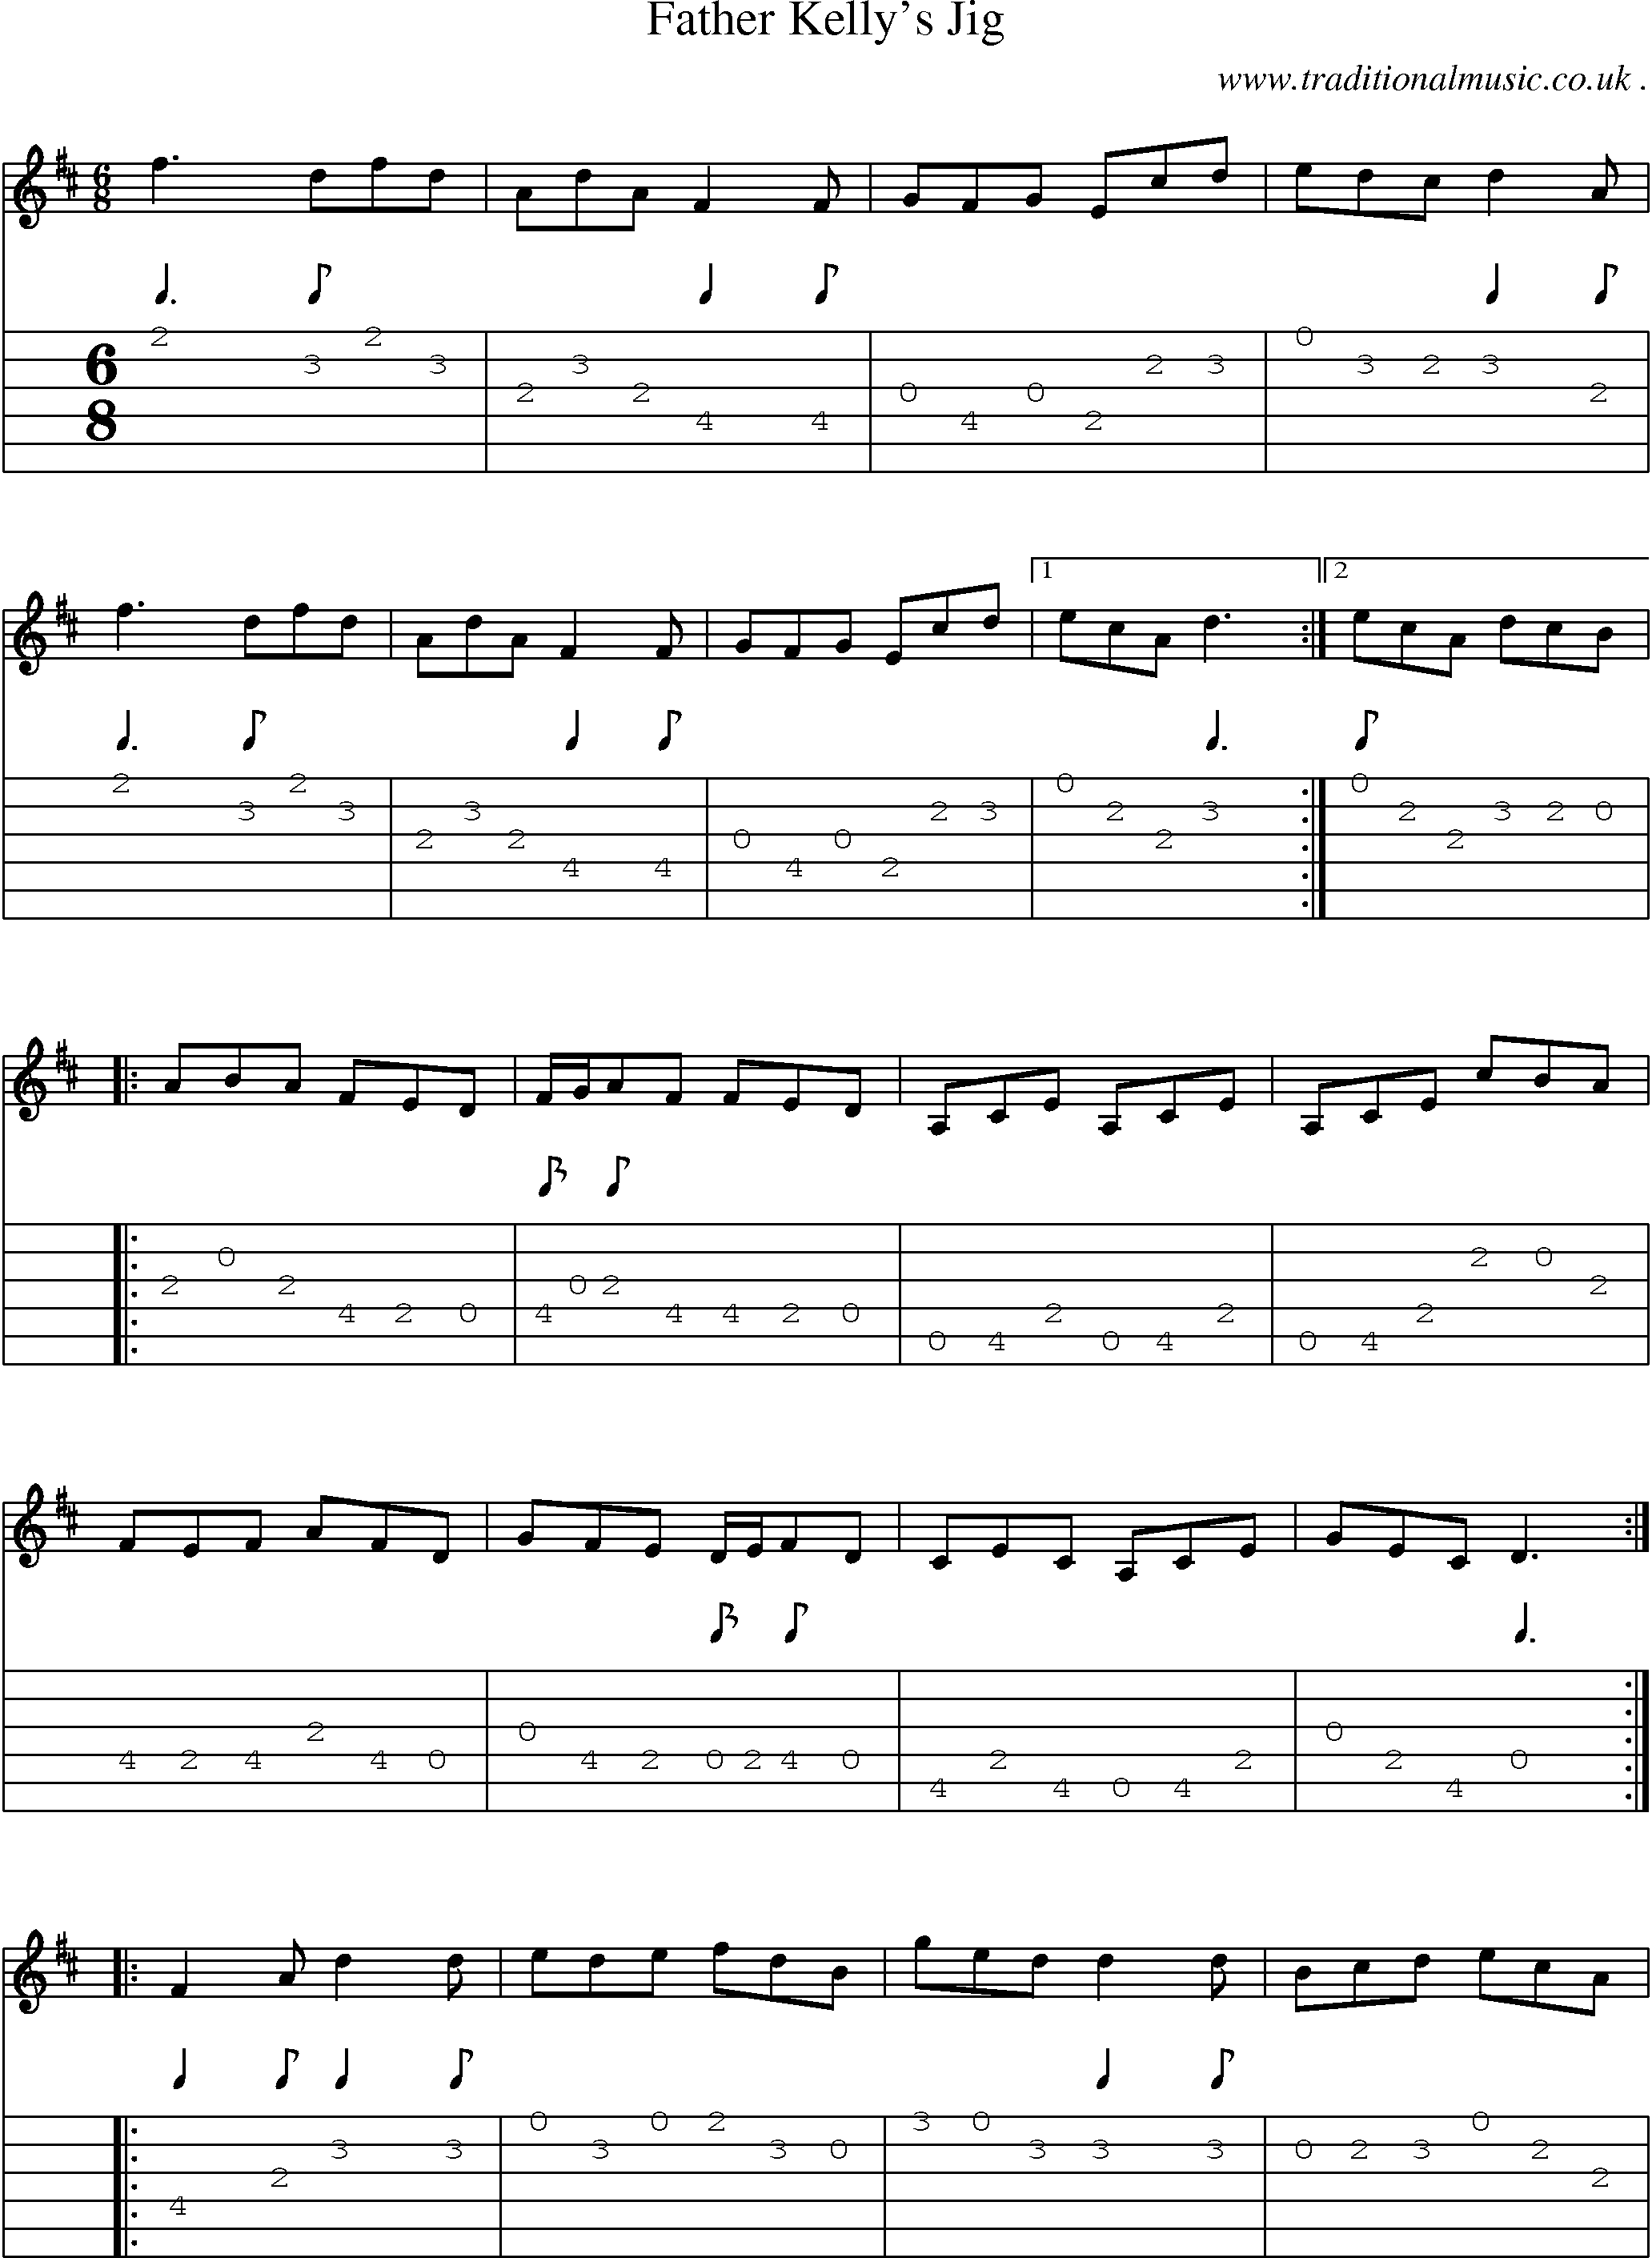 Sheet-Music and Guitar Tabs for Father Kellys Jig